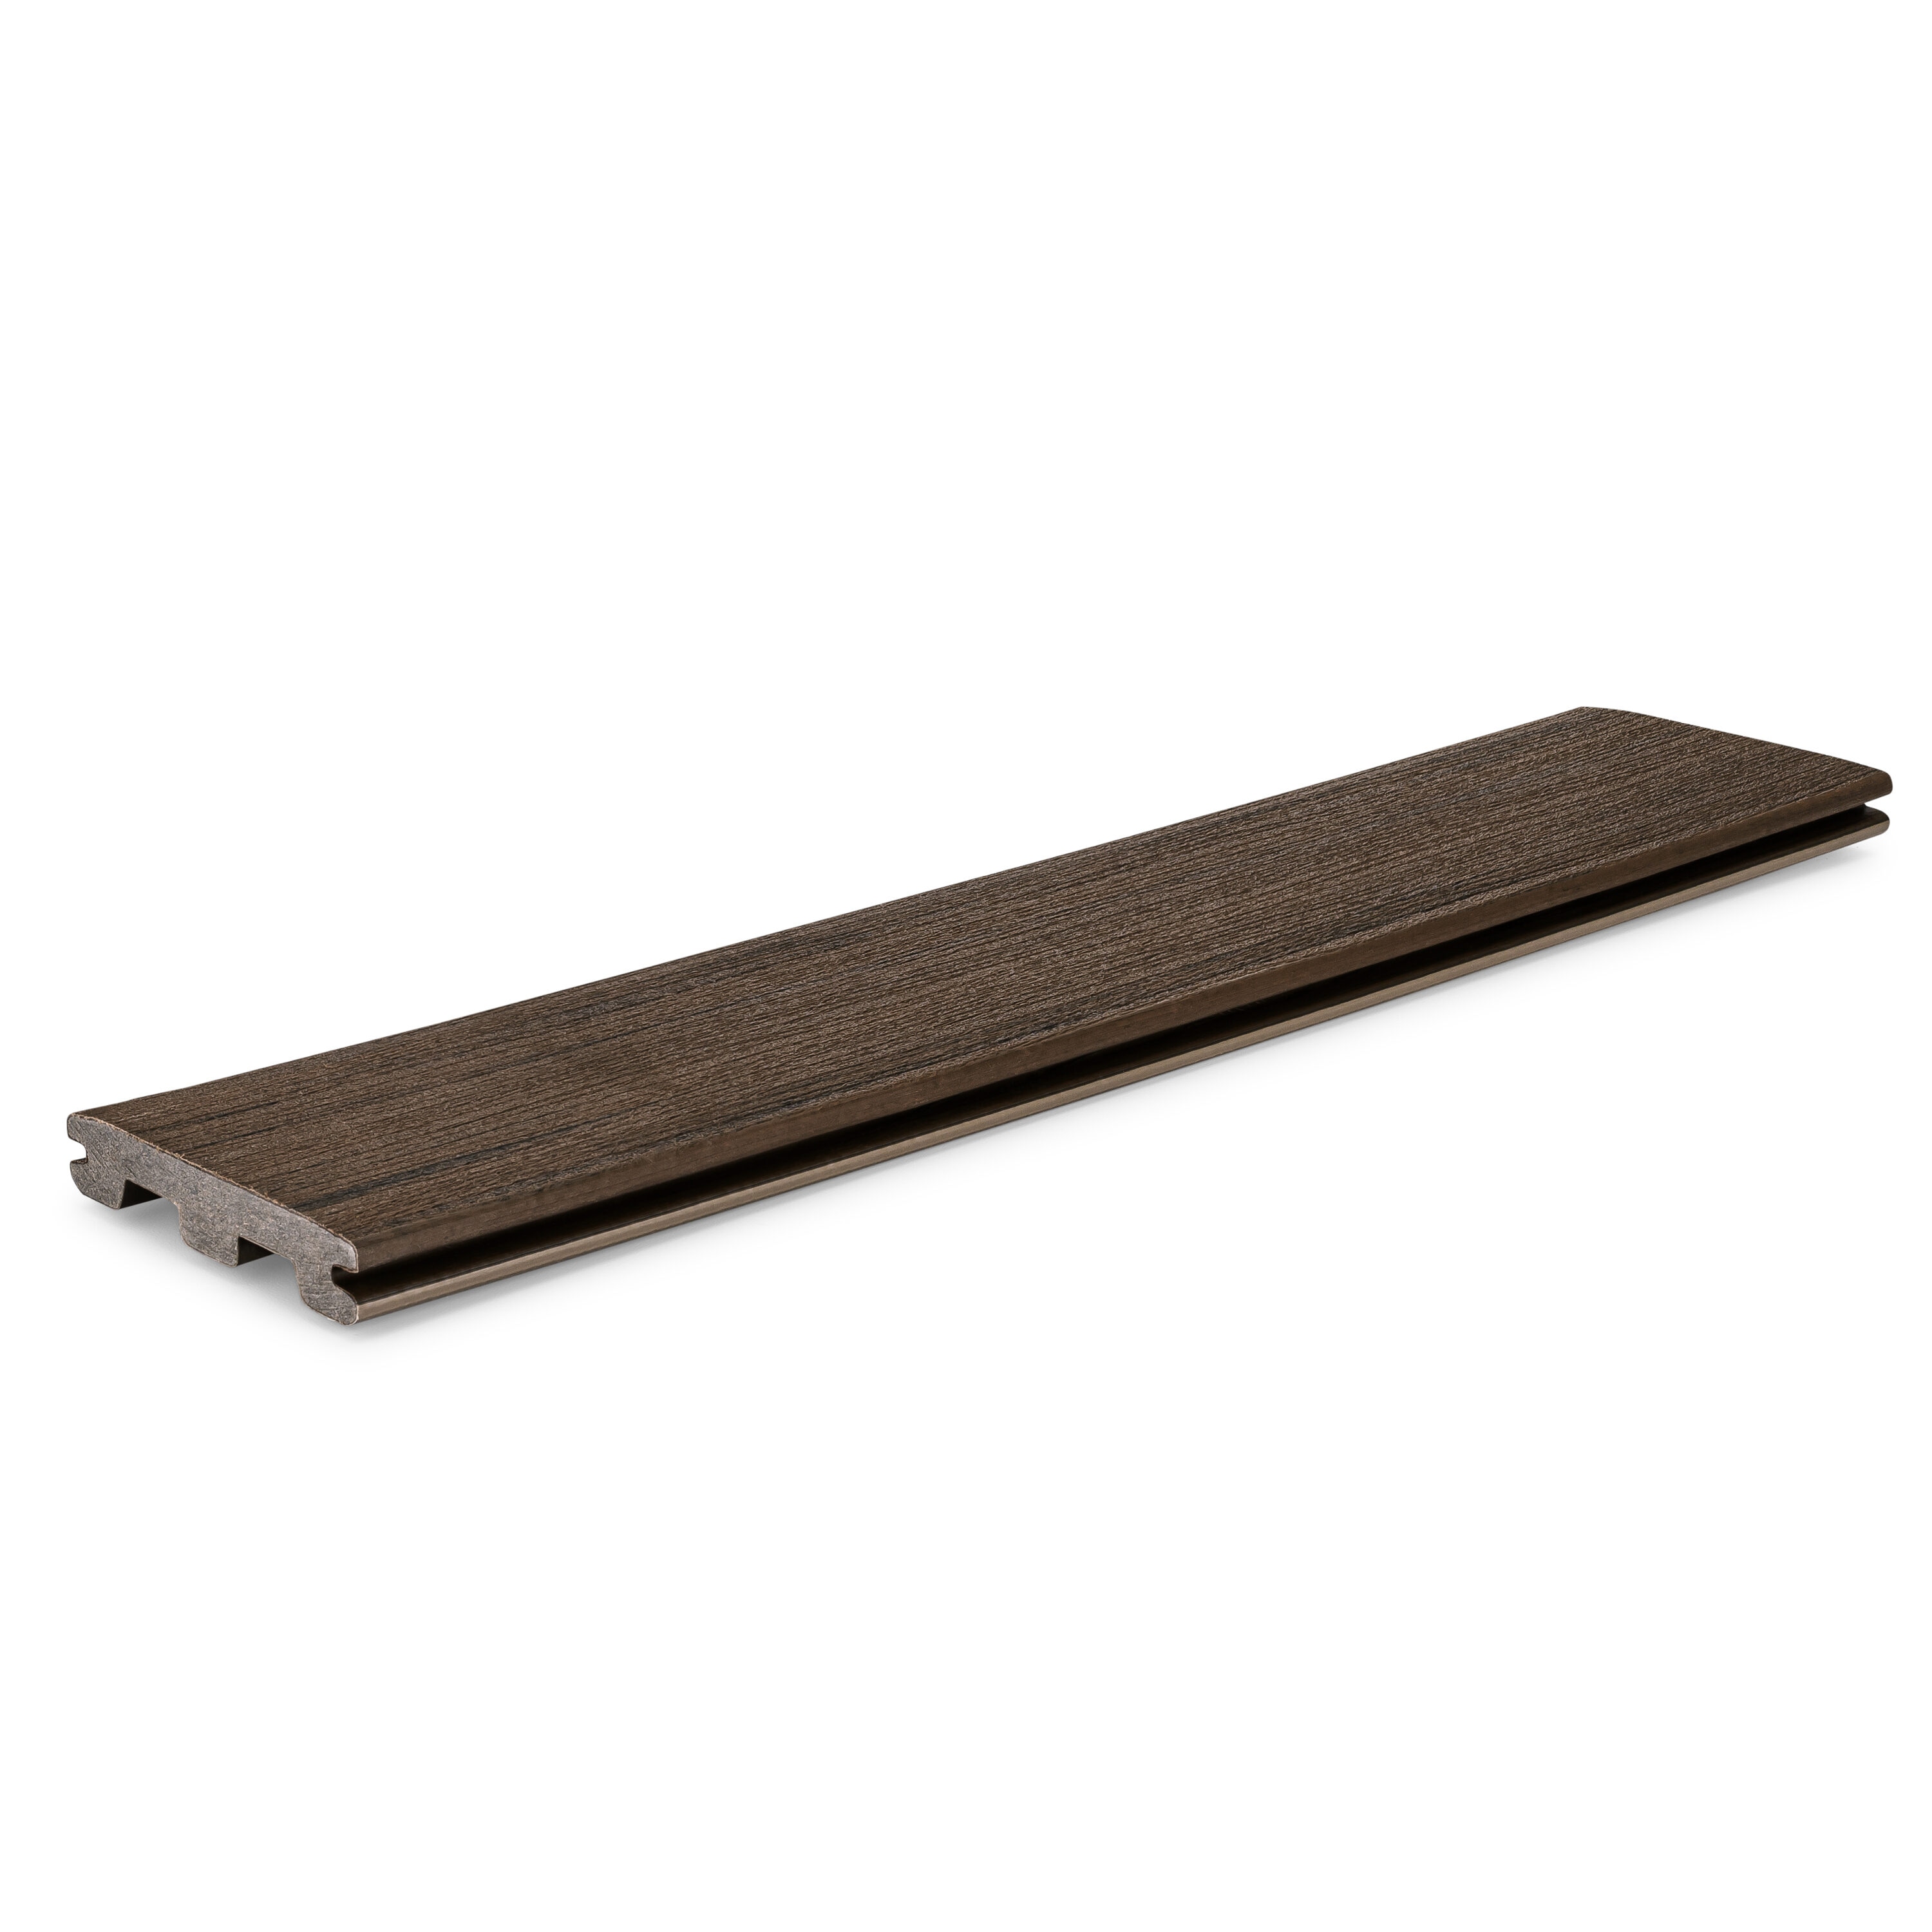 Prime+ 5/4-in x 6-in x 12-ft Dark Cocoa Grooved Composite Deck Board in Brown | - TimberTech PRGV5412DC